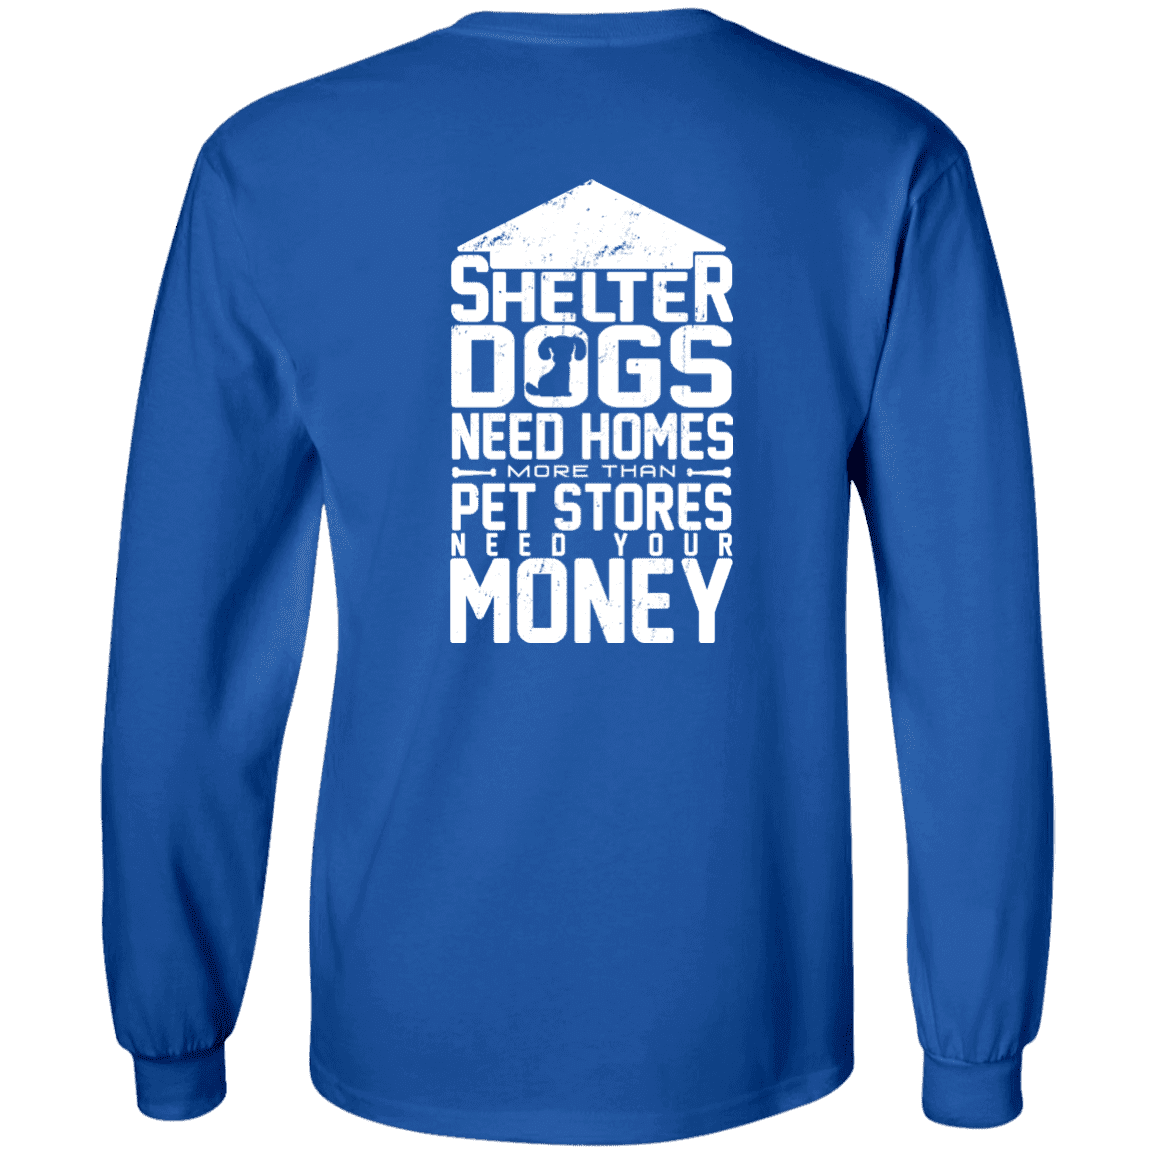 Shelter Dogs Need Homes - Long Sleeve T Shirt.